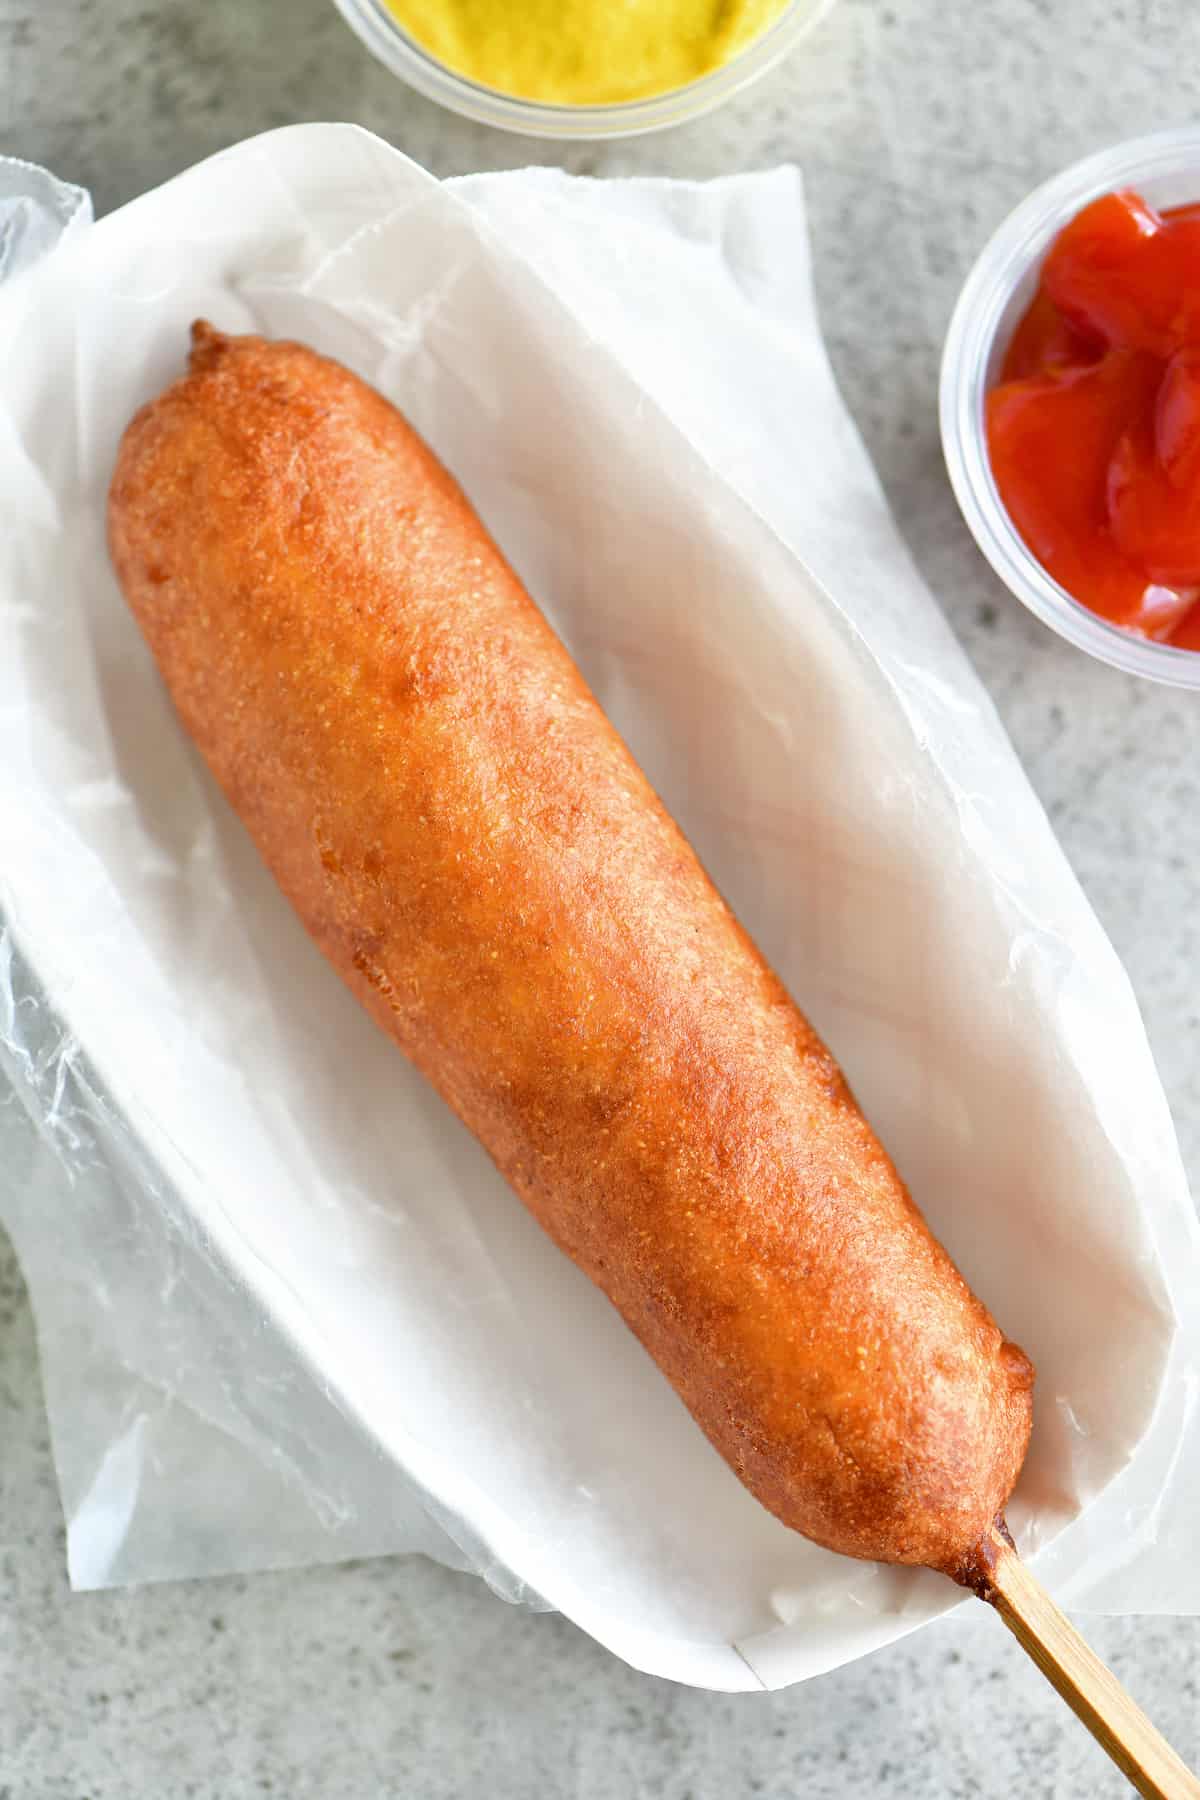 a corn dog on wax paper in a paper serving tray